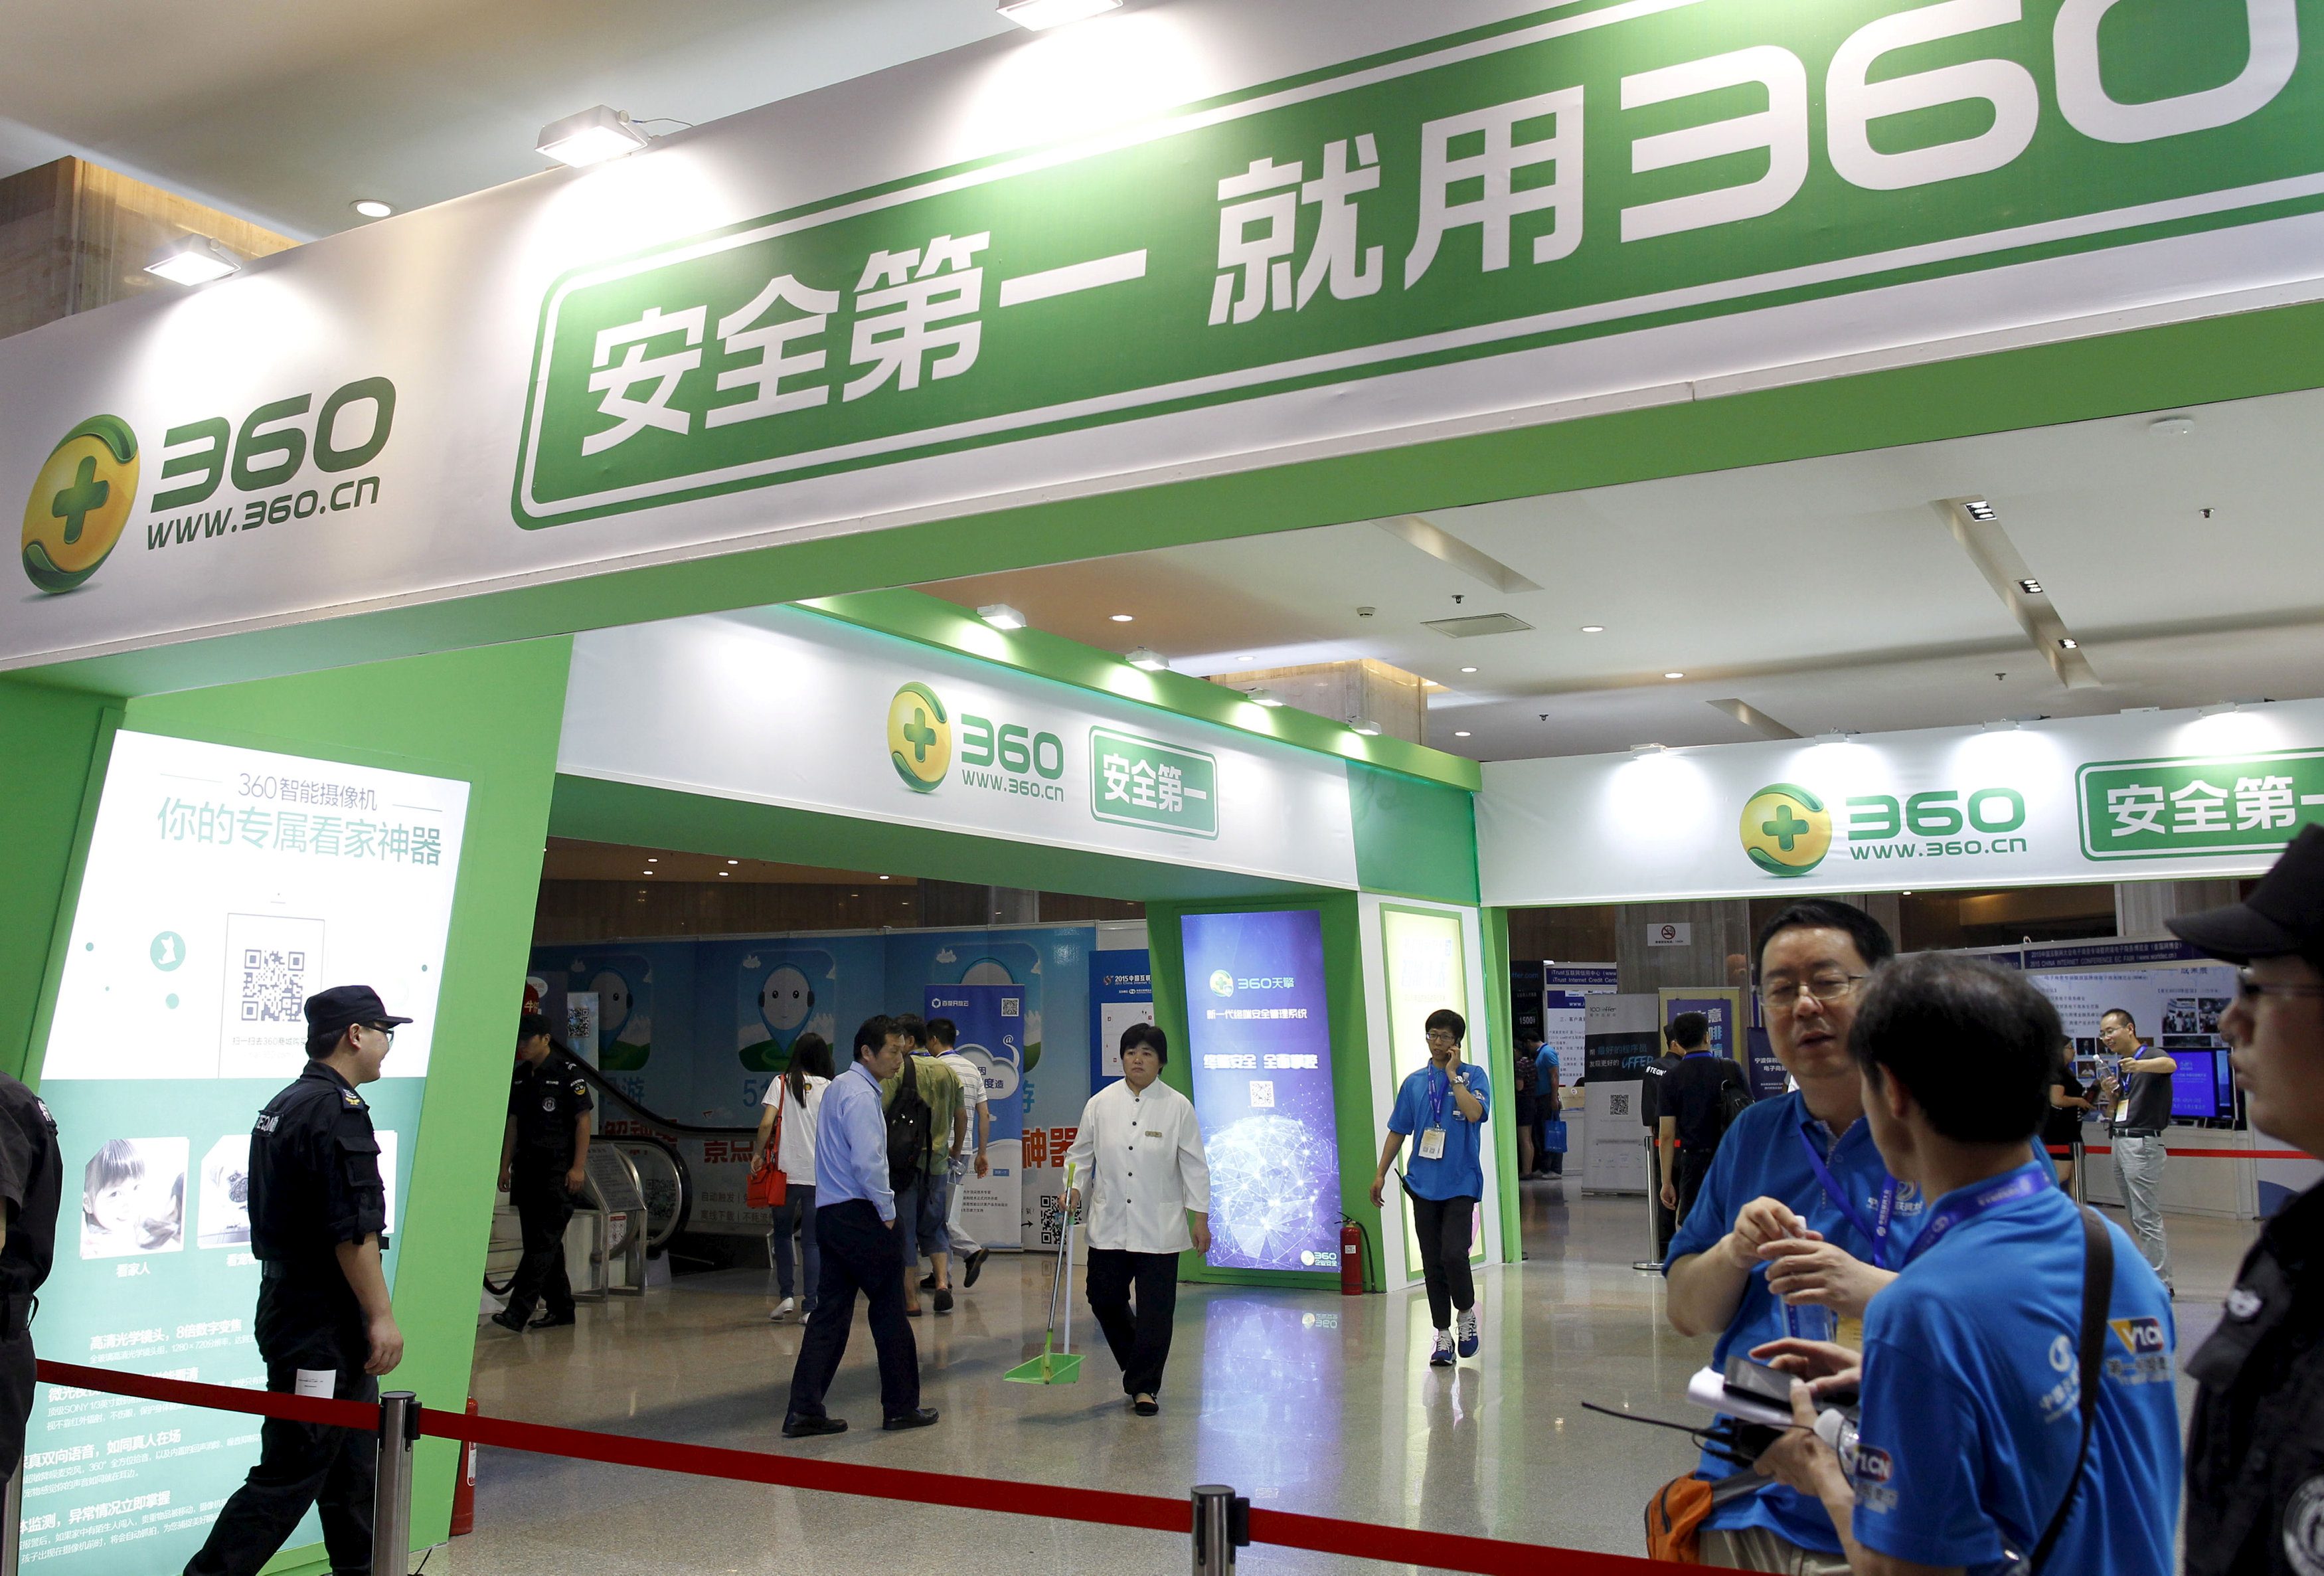 Qihoo to return to Shanghai with $7.57b backdoor listing deal with China's SJEC